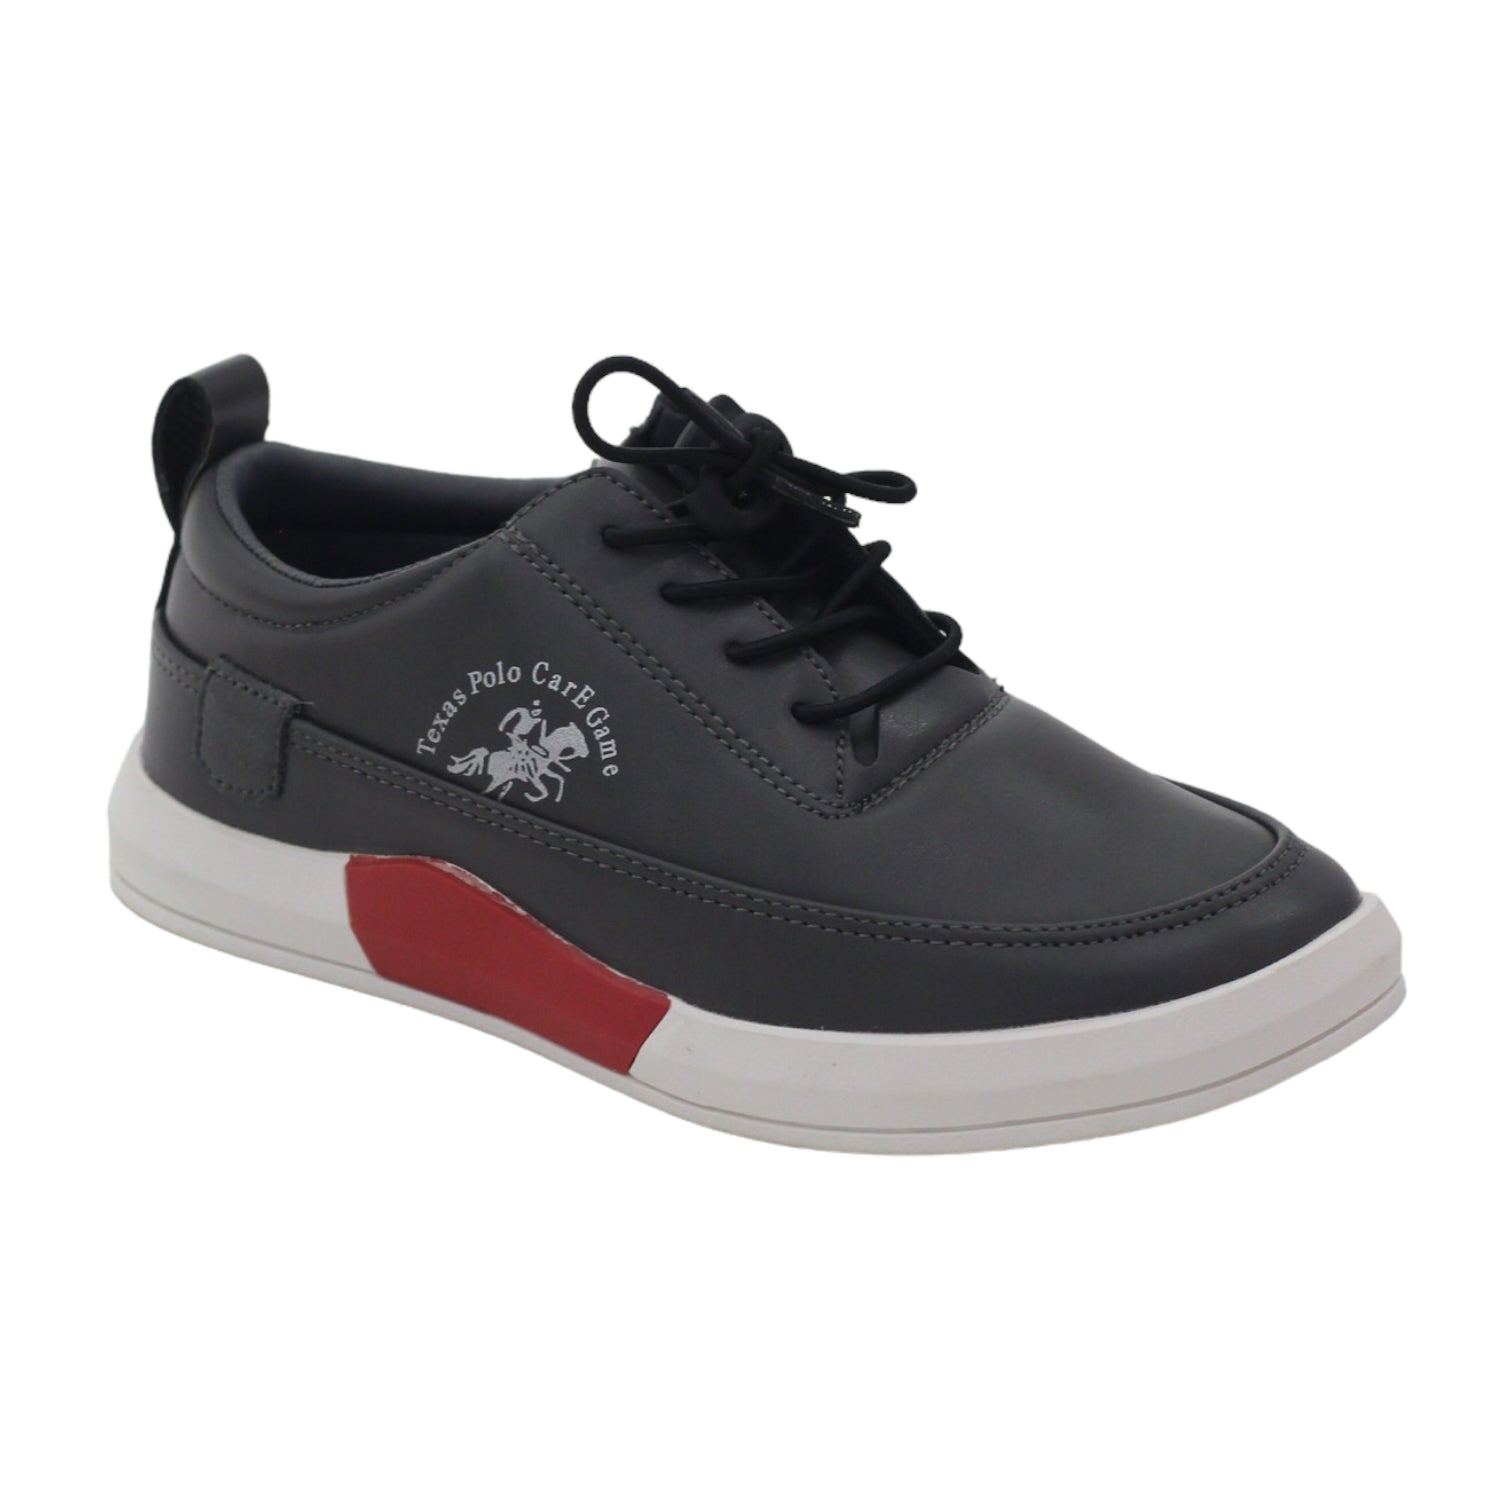 Oliver boys lace up B-19 sneaker grey